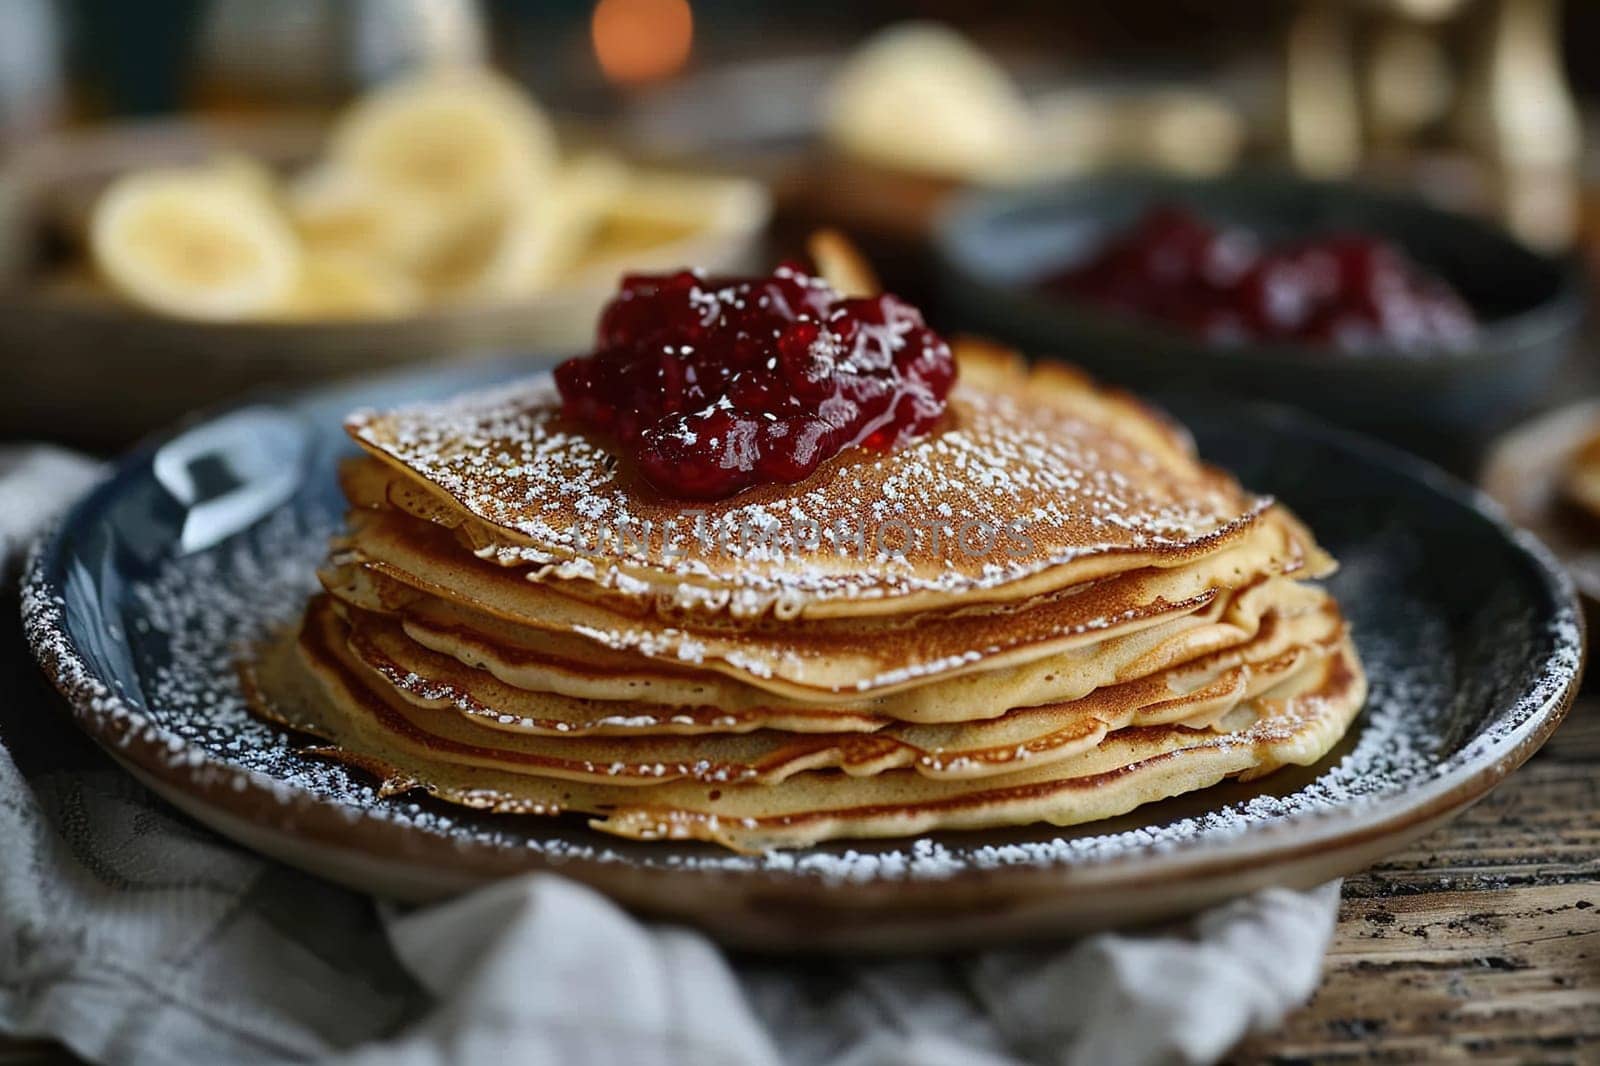 A stack of pancakes with lingonberry sauce on a plate on a wooden table. Swedish cuisine dish.